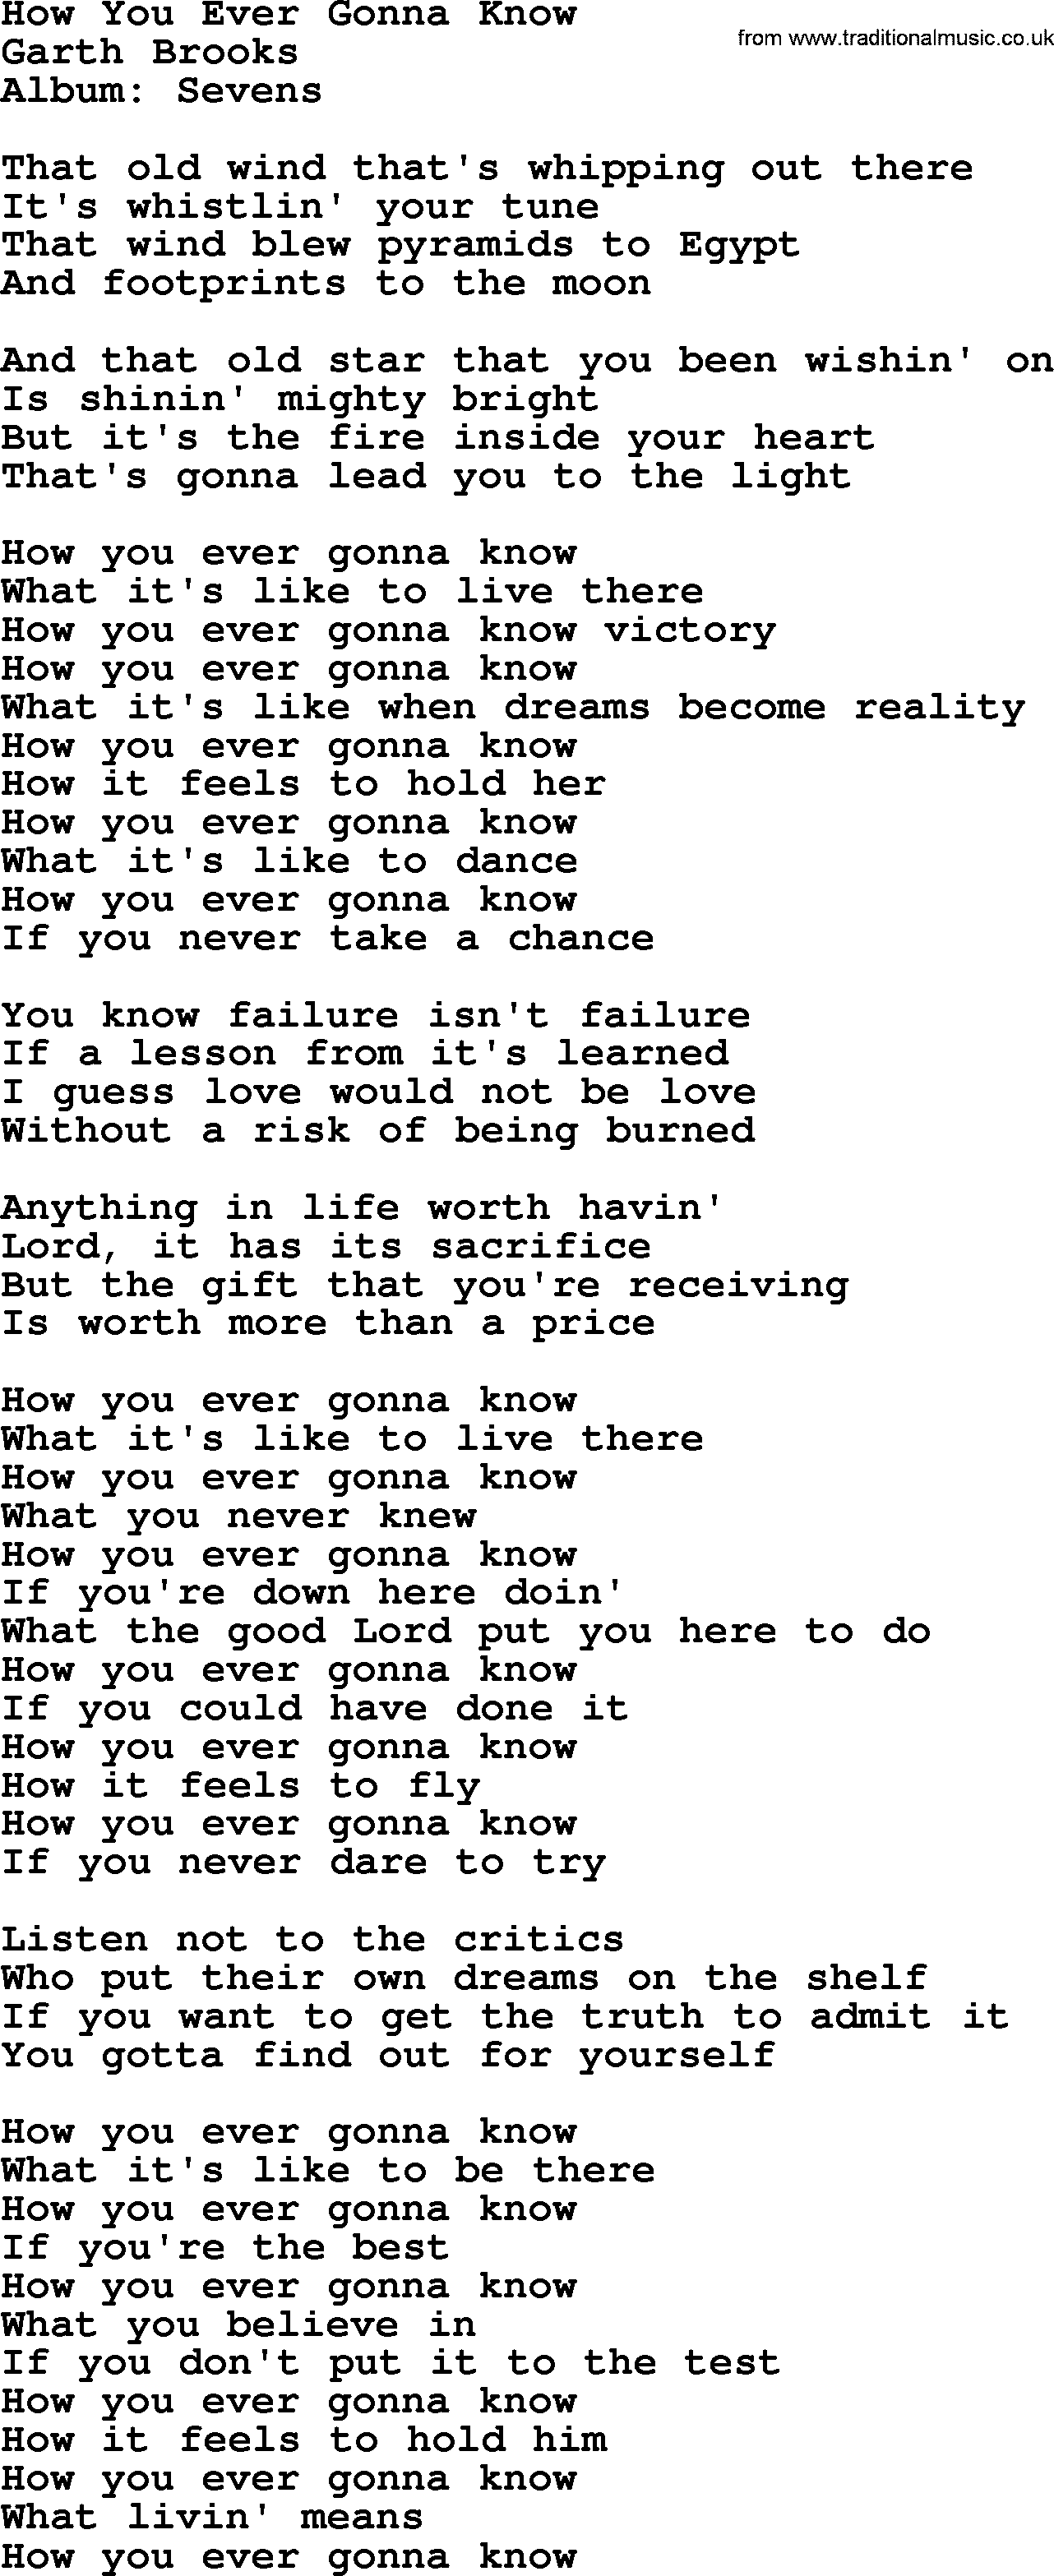 Garth Brooks song: How You Ever Gonna Know, lyrics